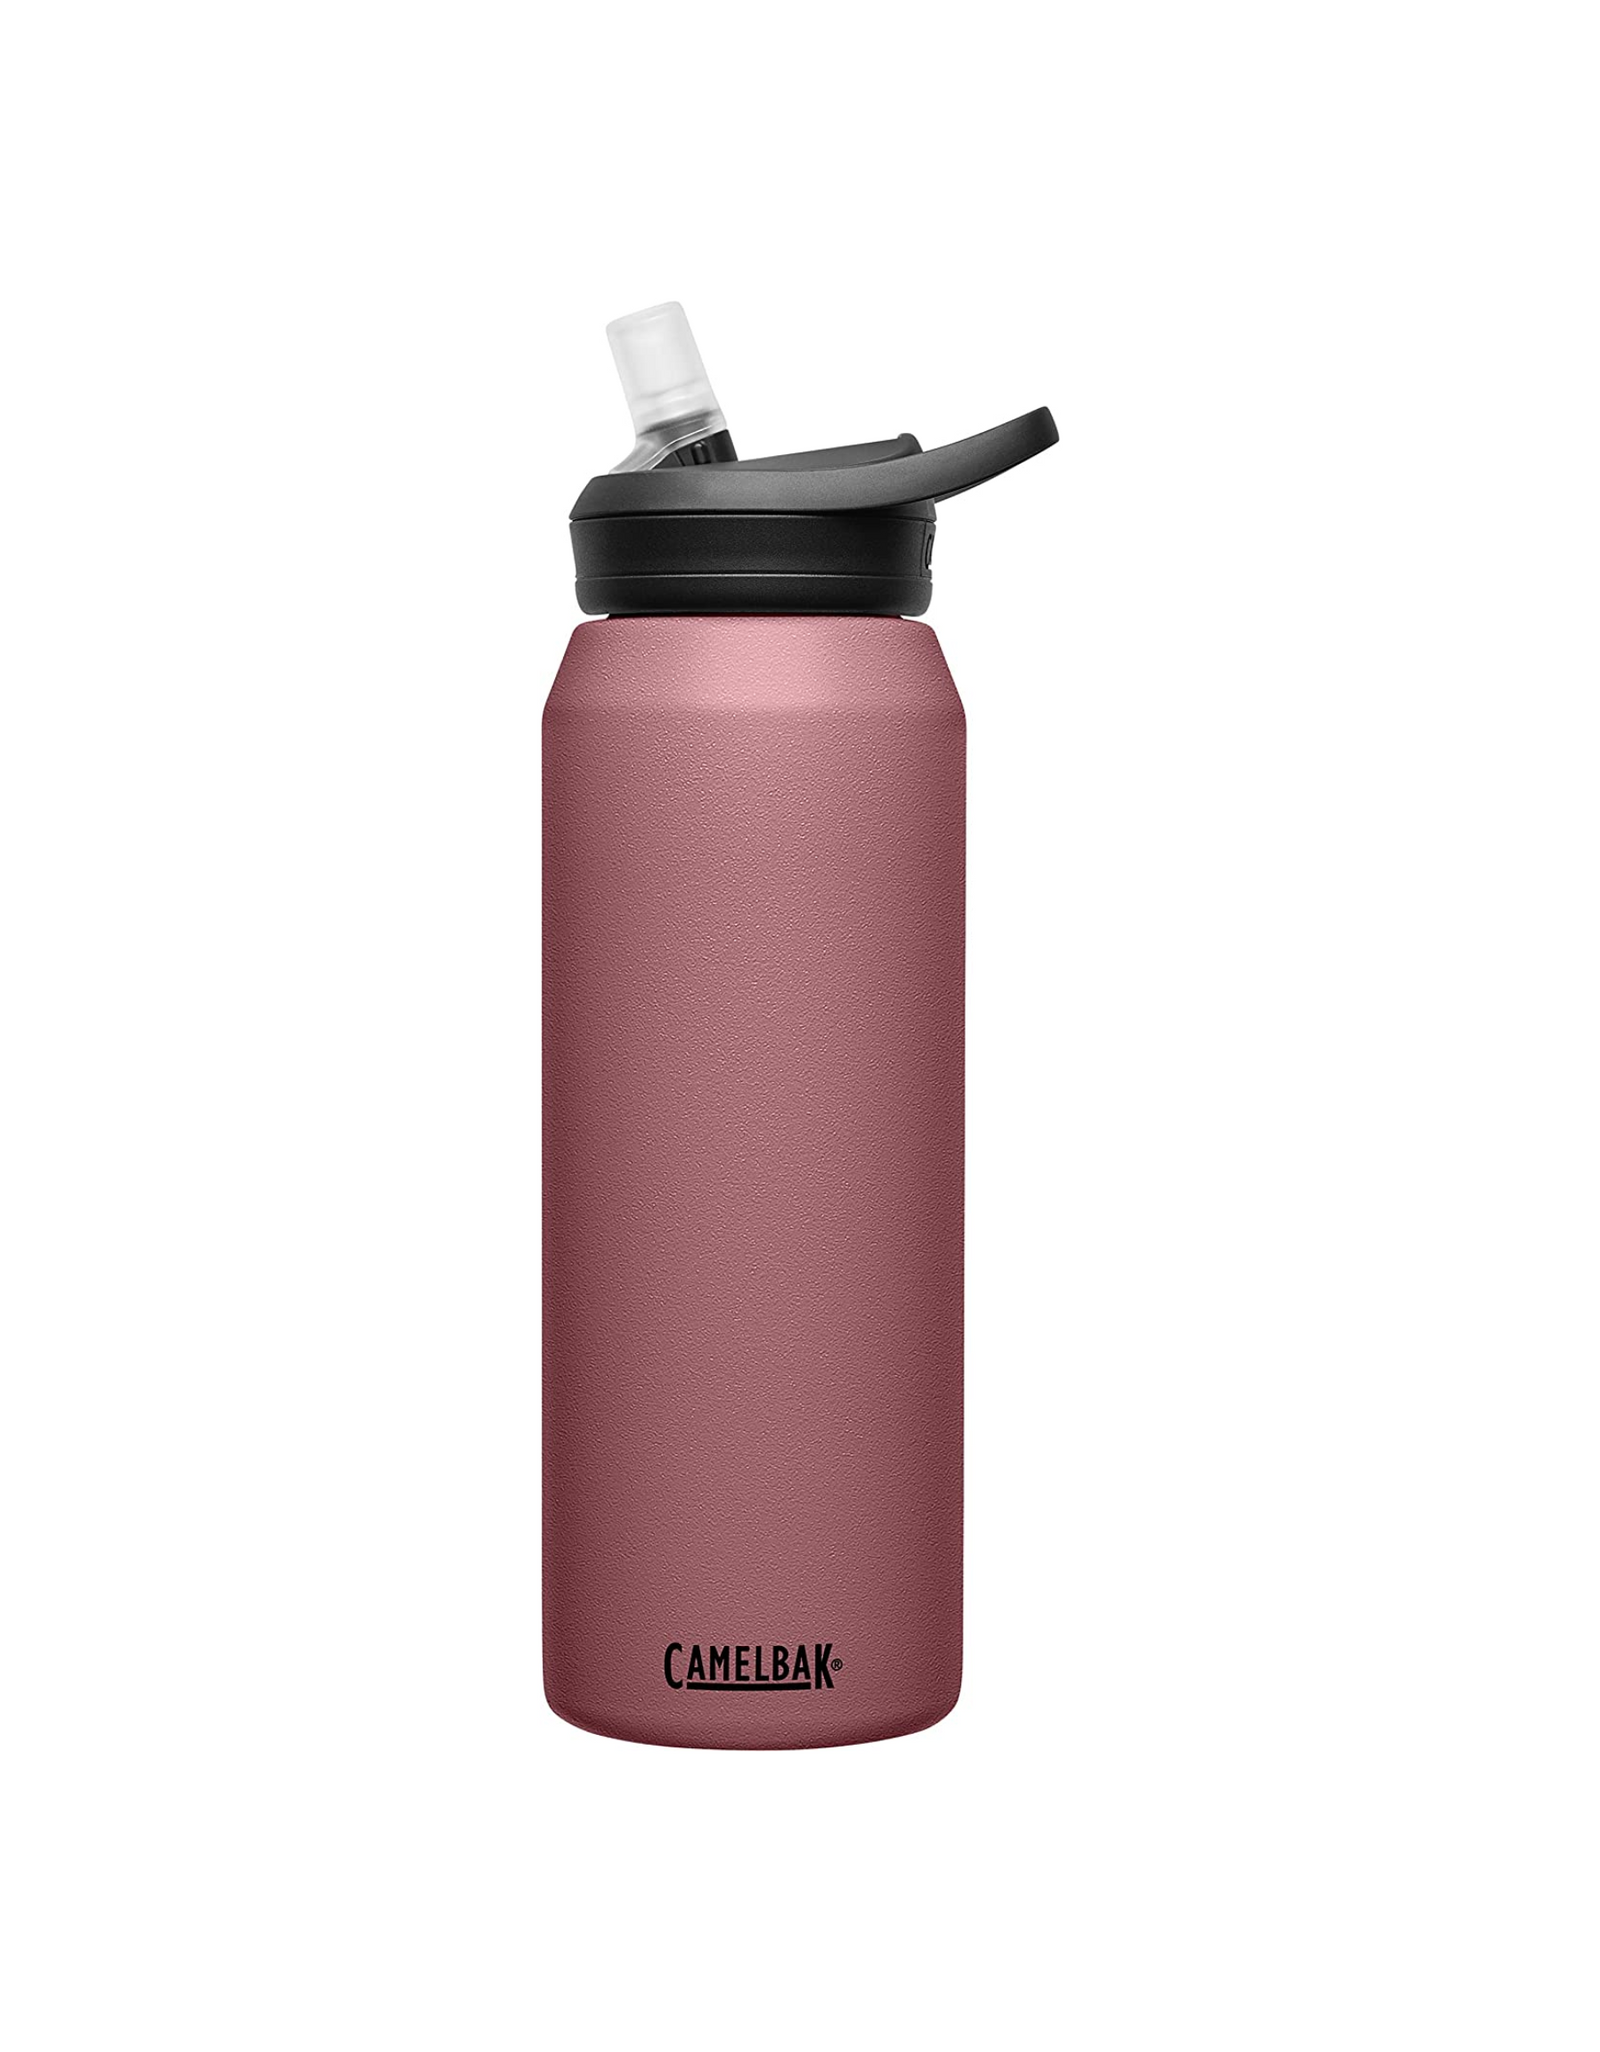 CamelBak eddy+ Water Bottle with Straw, Insulated Stainless Steel, 32 oz, Terracotta Rose